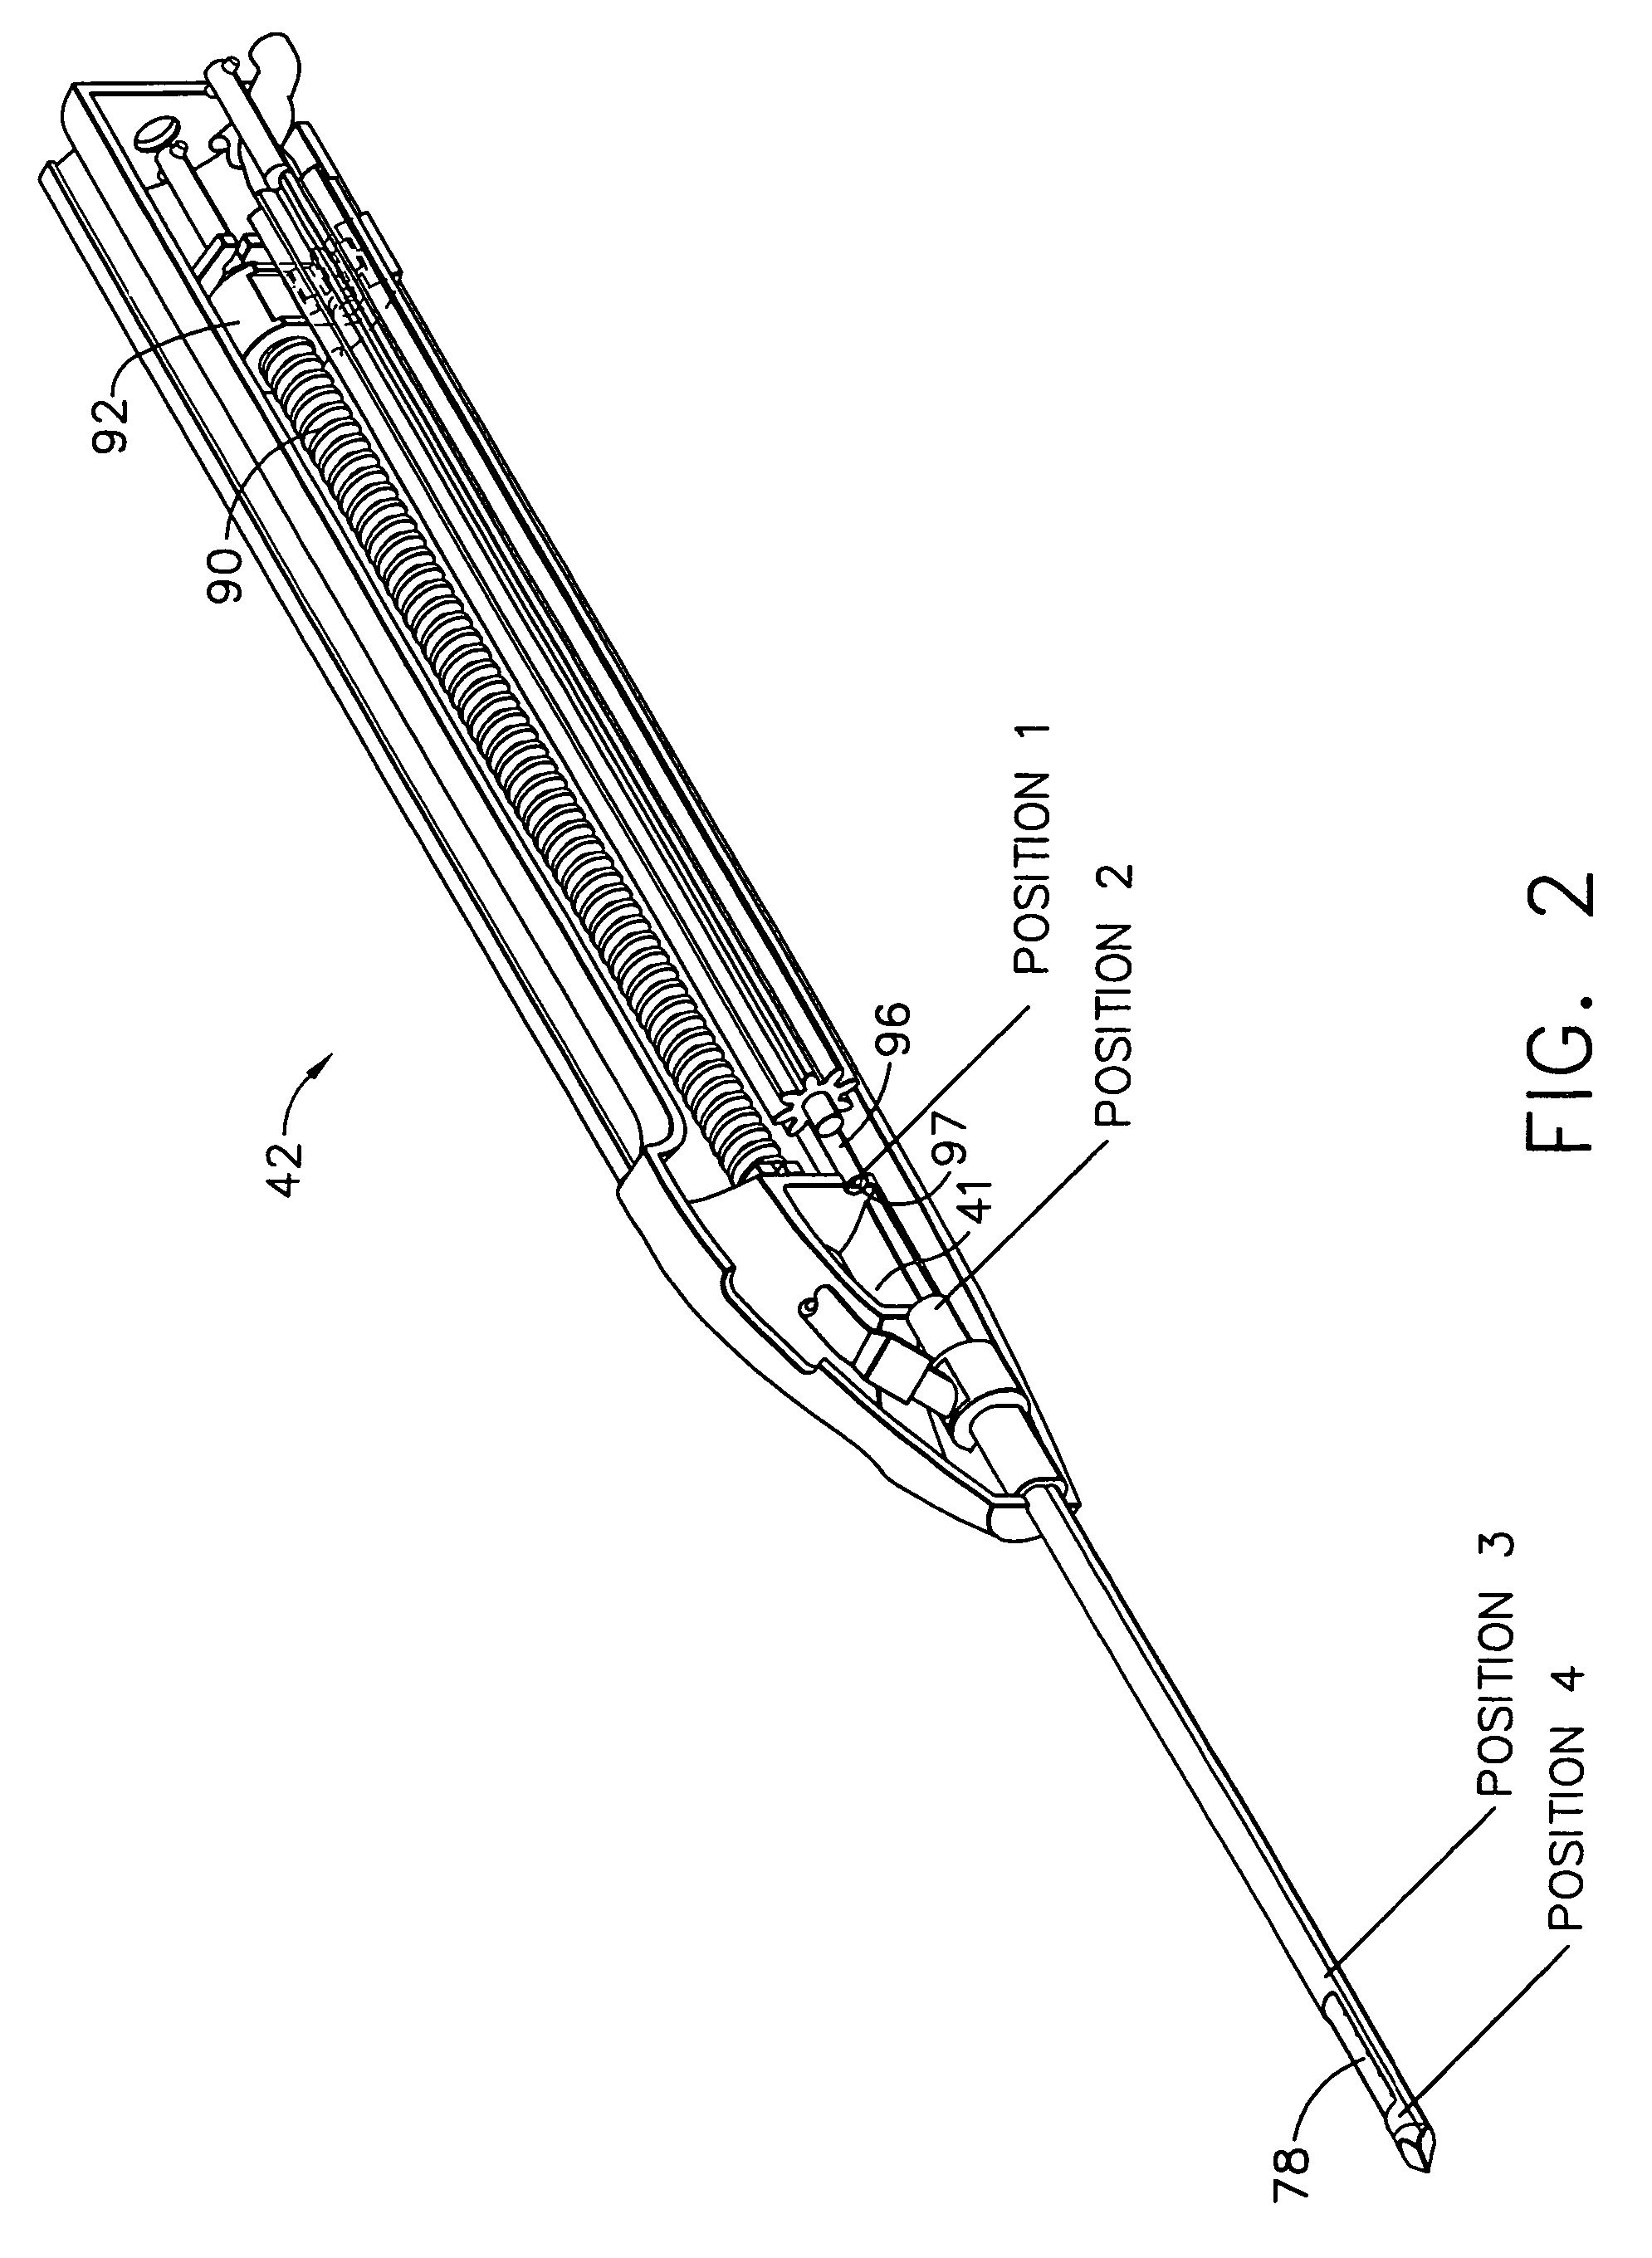 Surgical biopsy system with control unit for selecting an operational mode